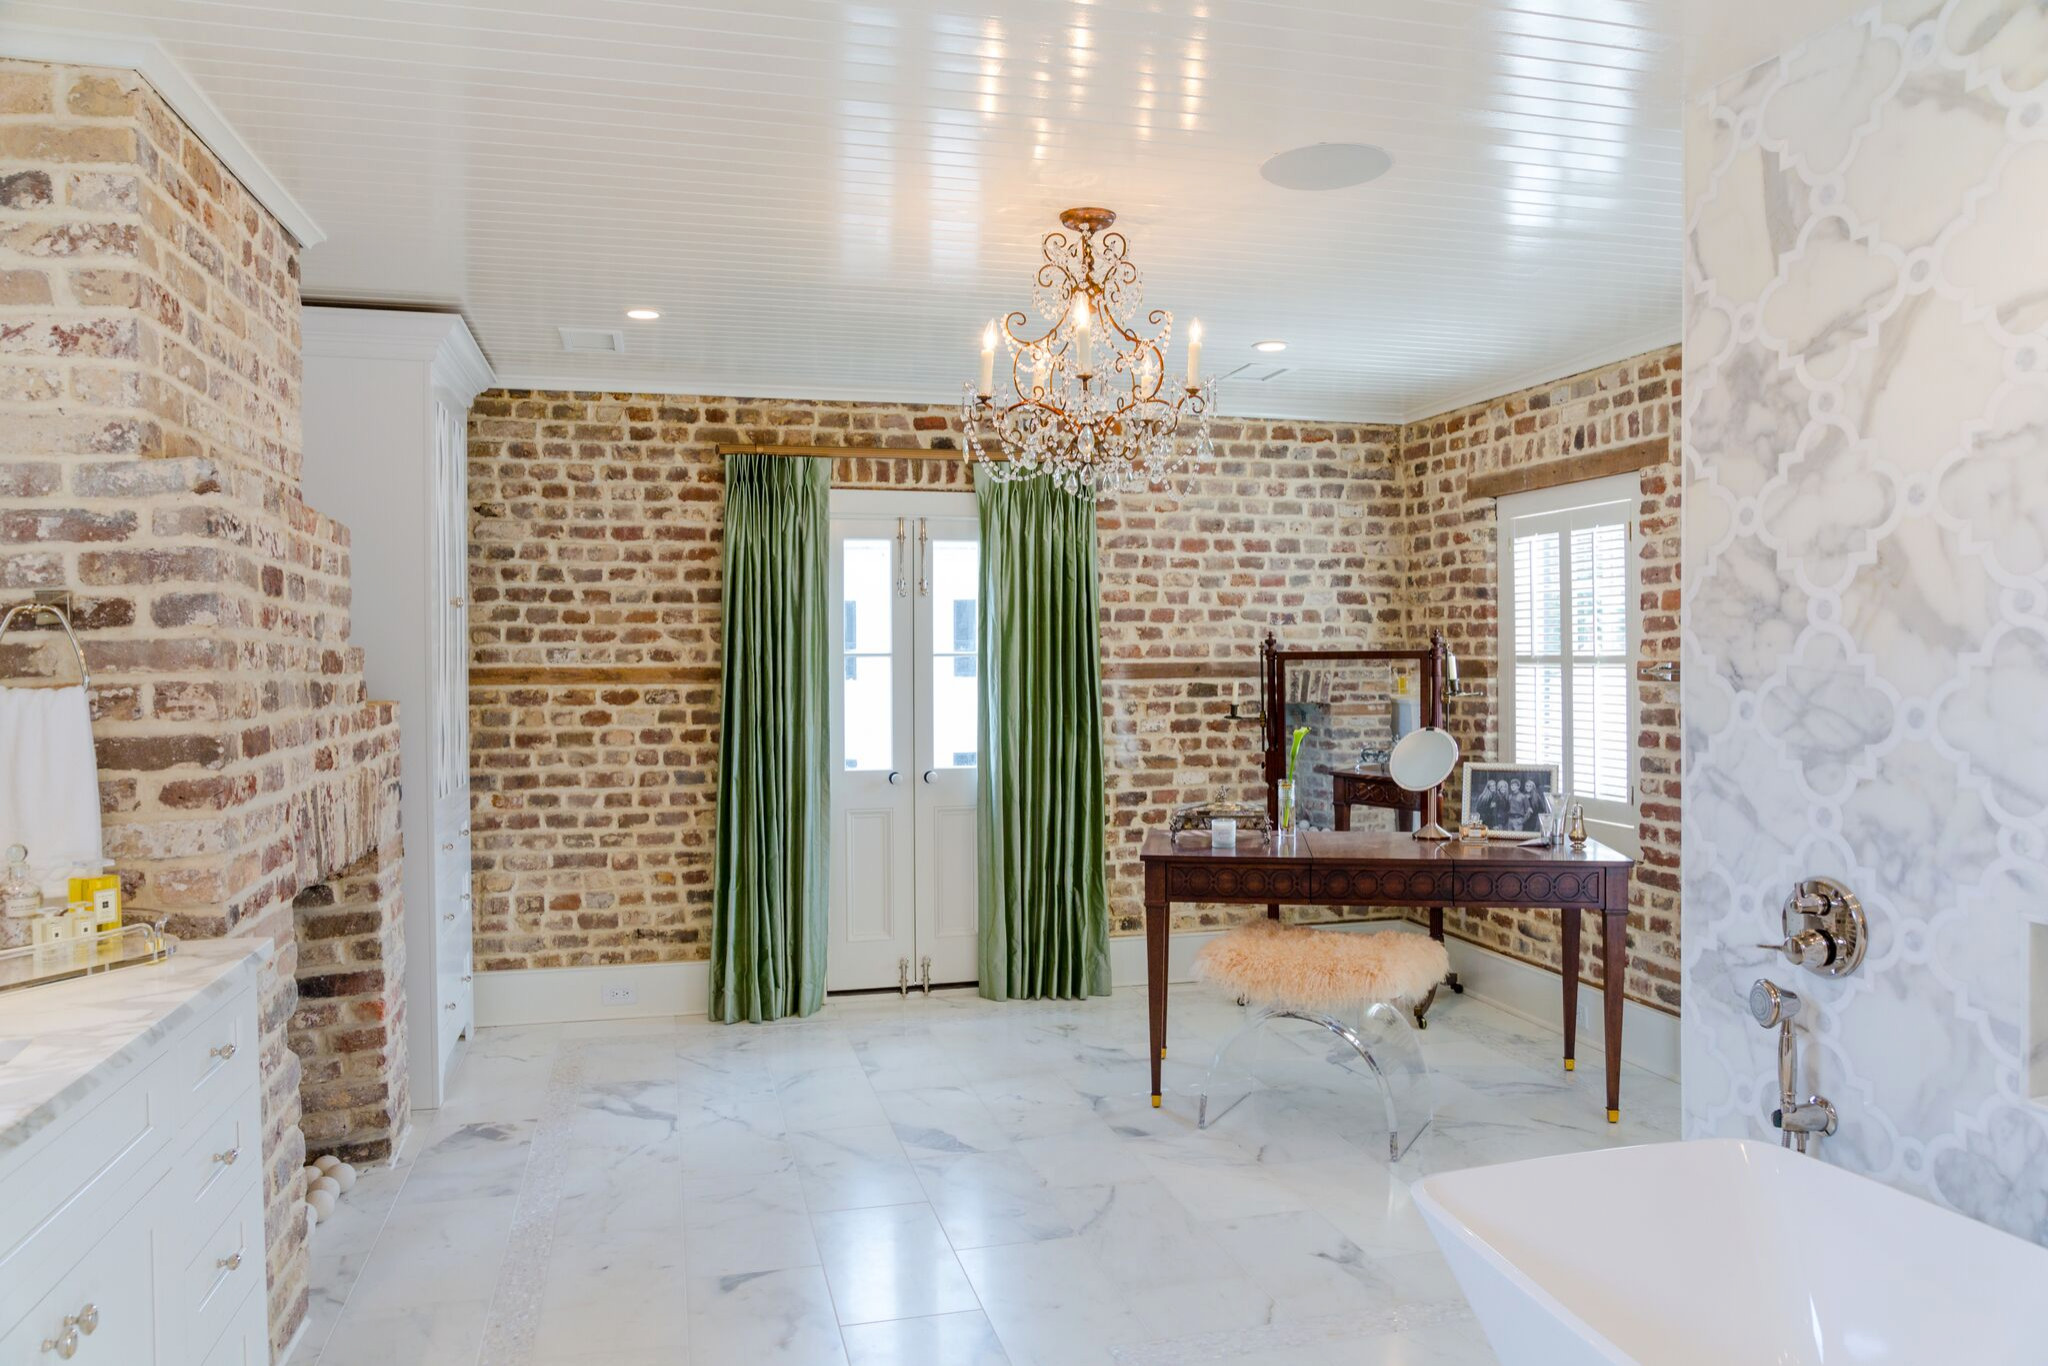 Luxe Master Bathroom in an Historic Home